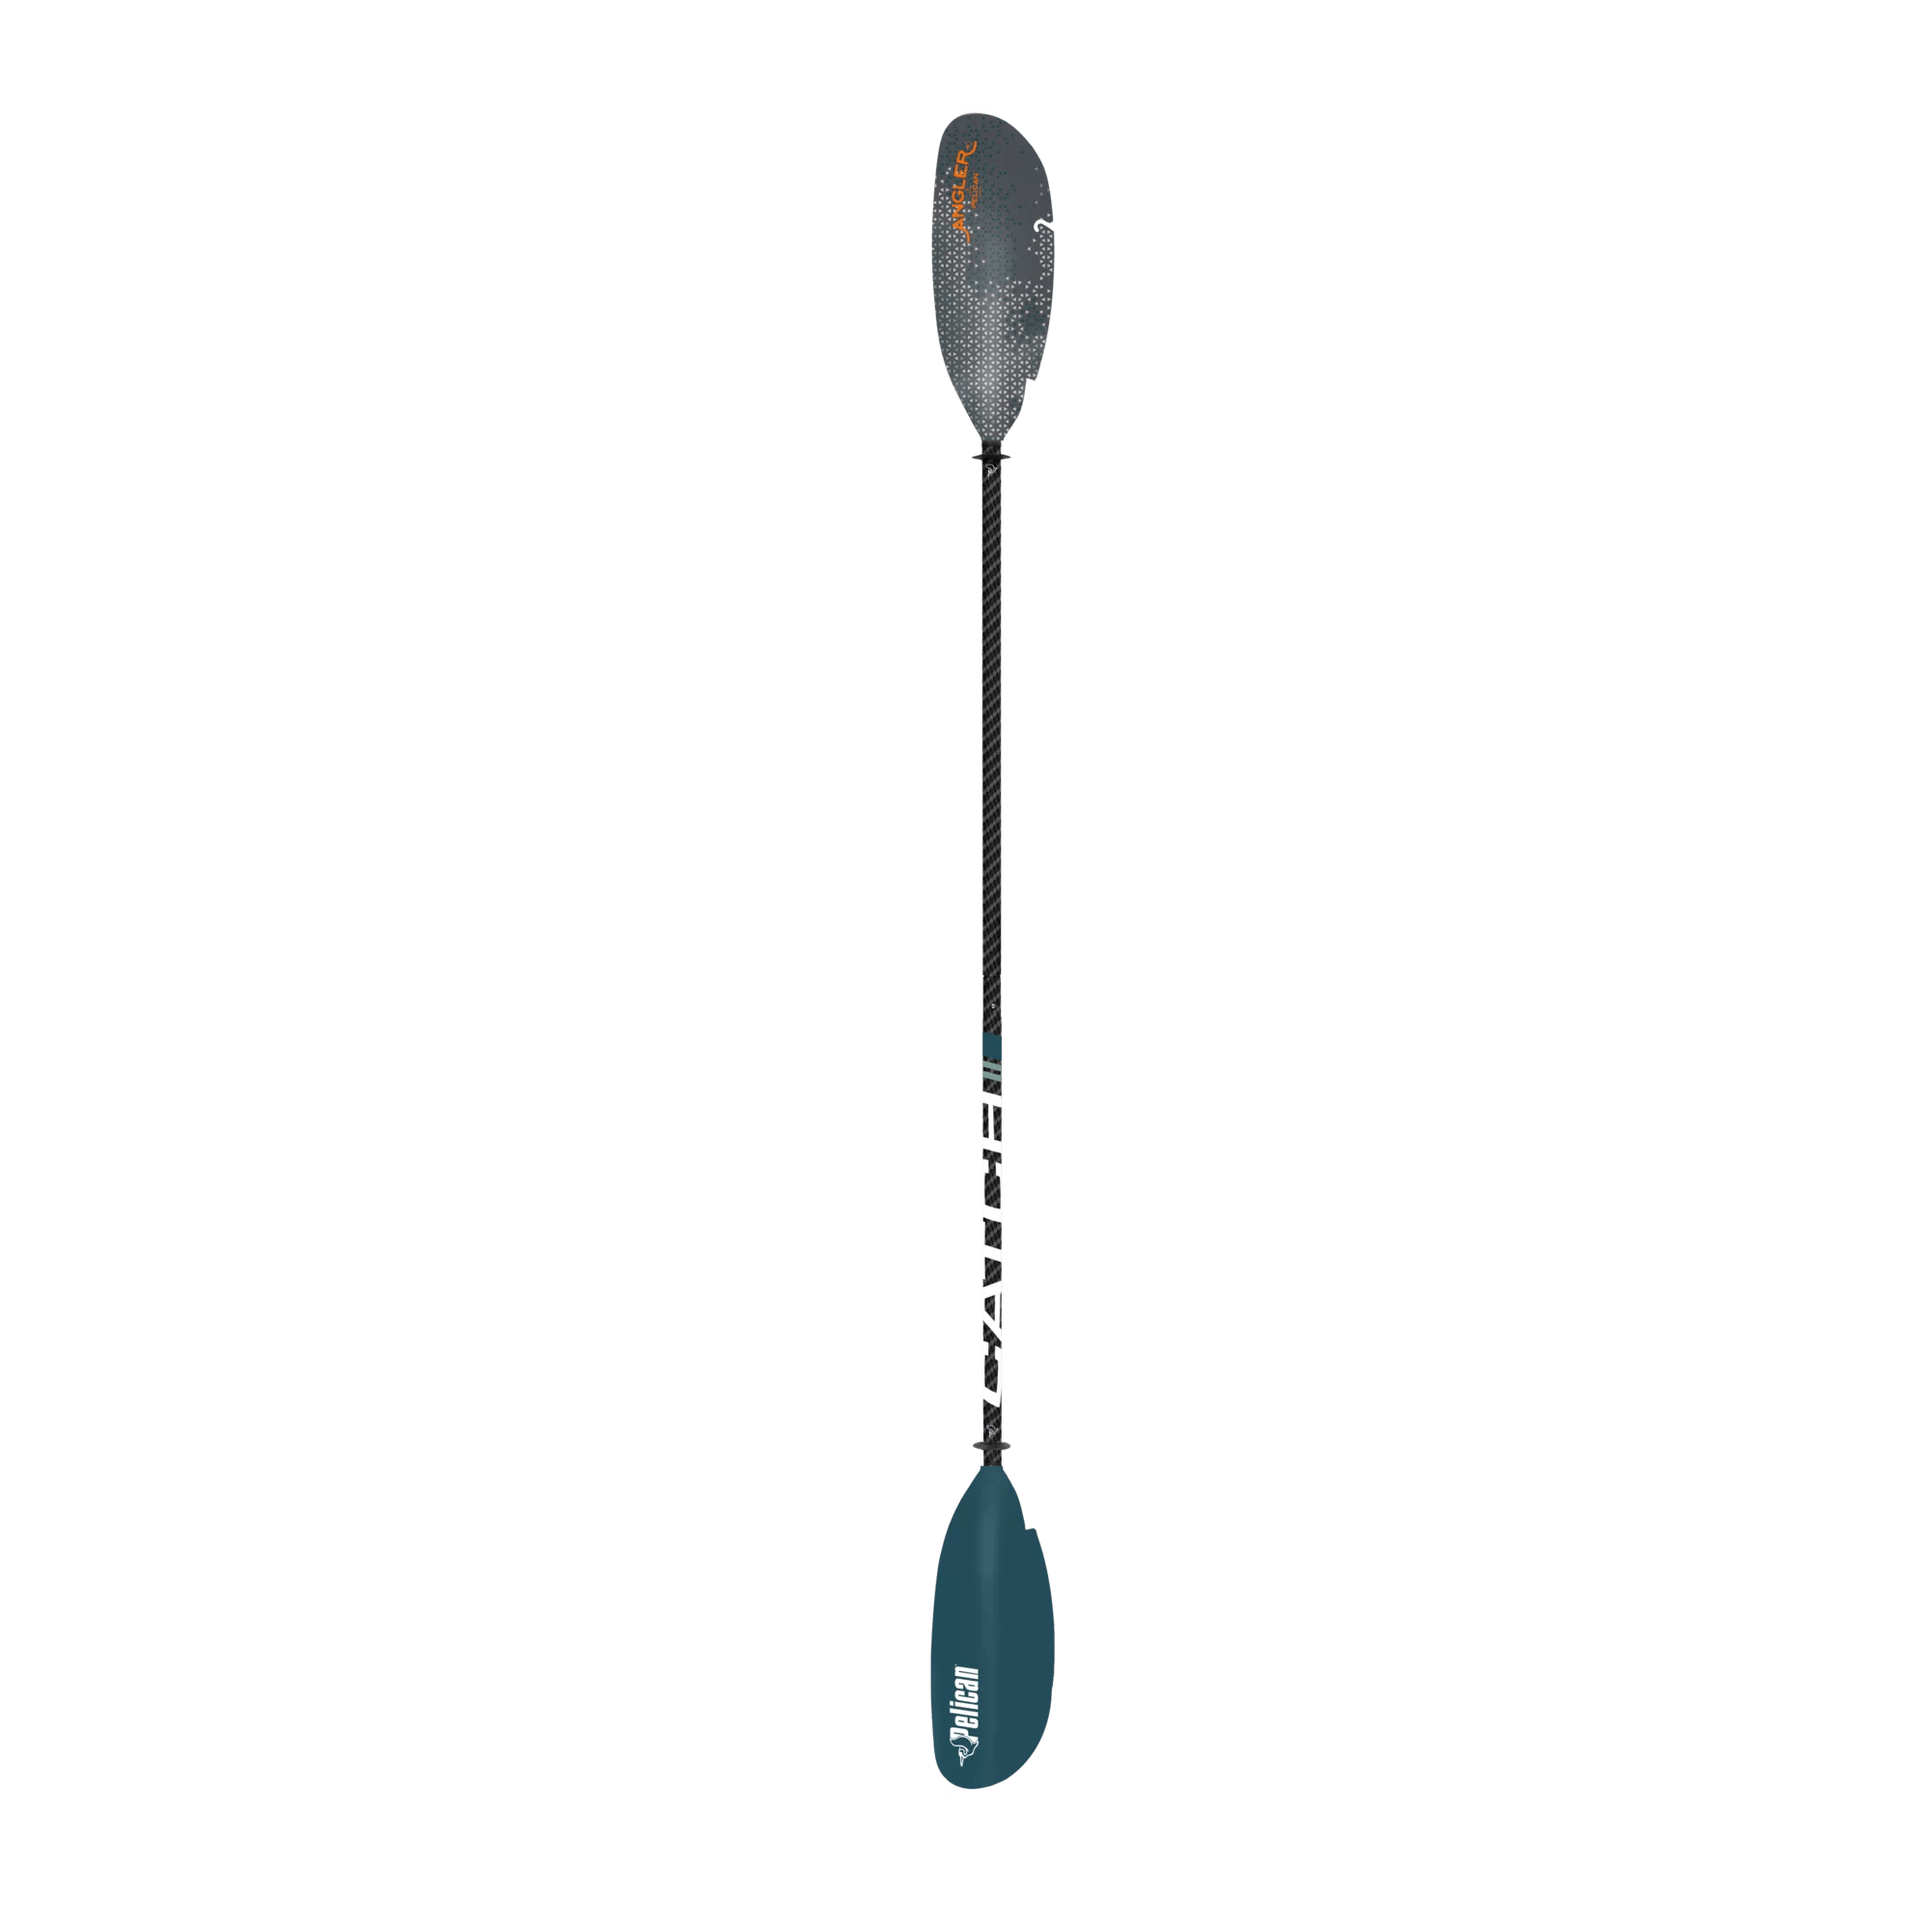 PELICAN - Catch Fishing Kayak Paddle 250 cm (98.5") - Blue - PS1973-00 - TOP